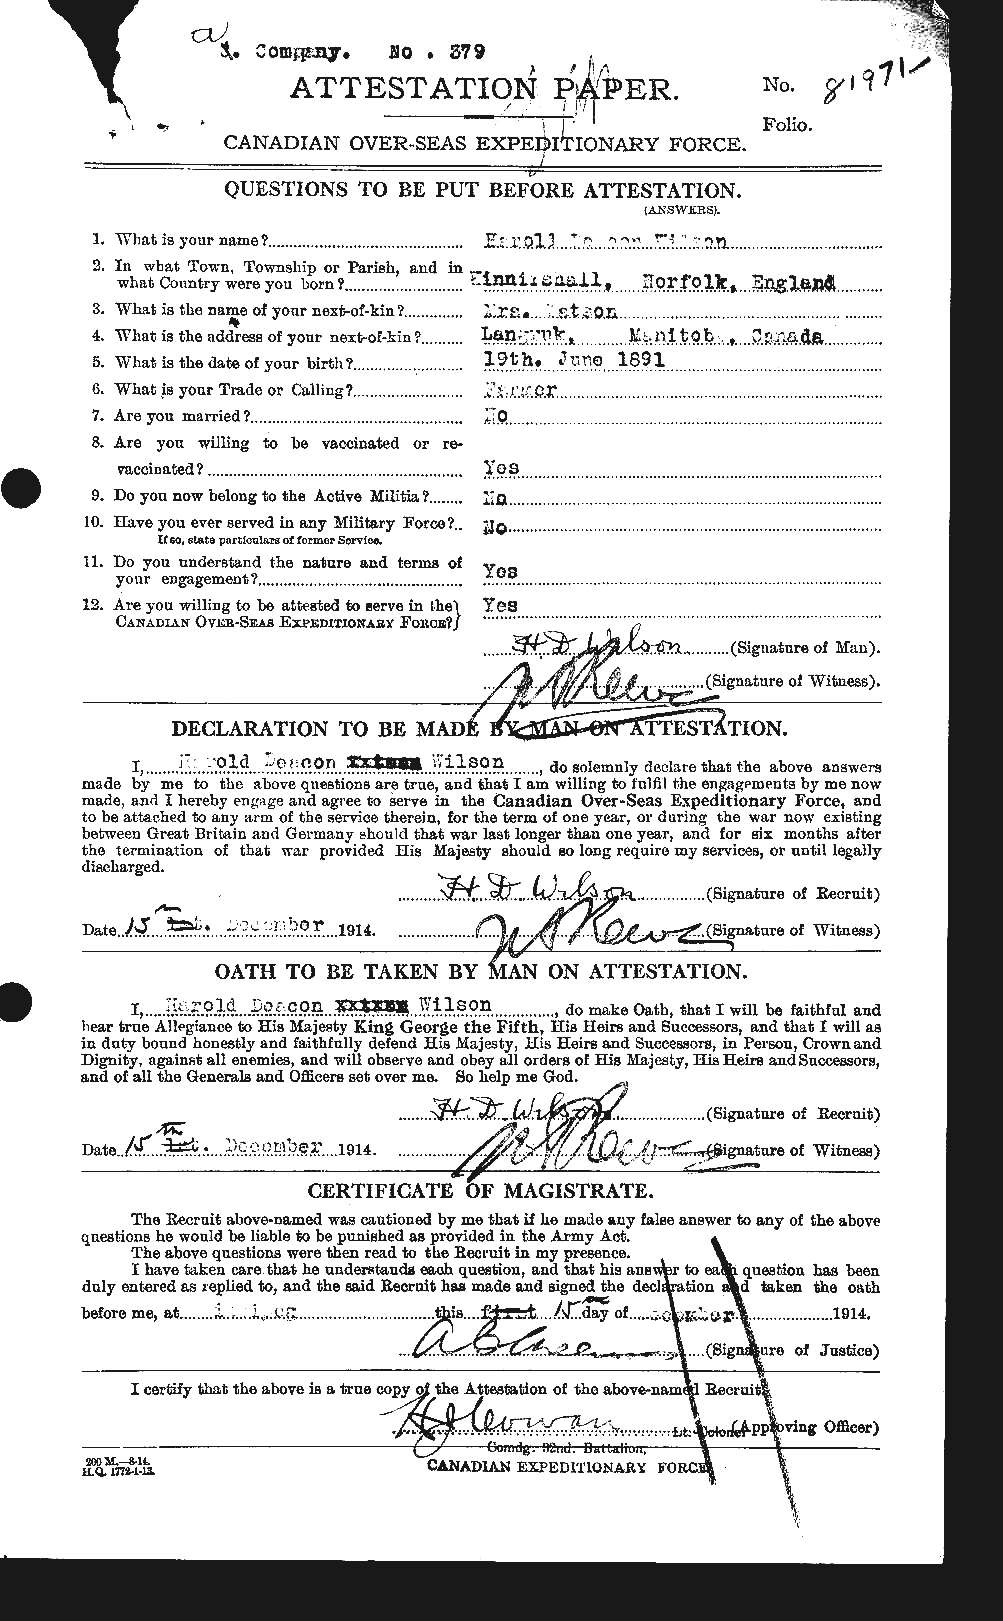 Personnel Records of the First World War - CEF 679403a